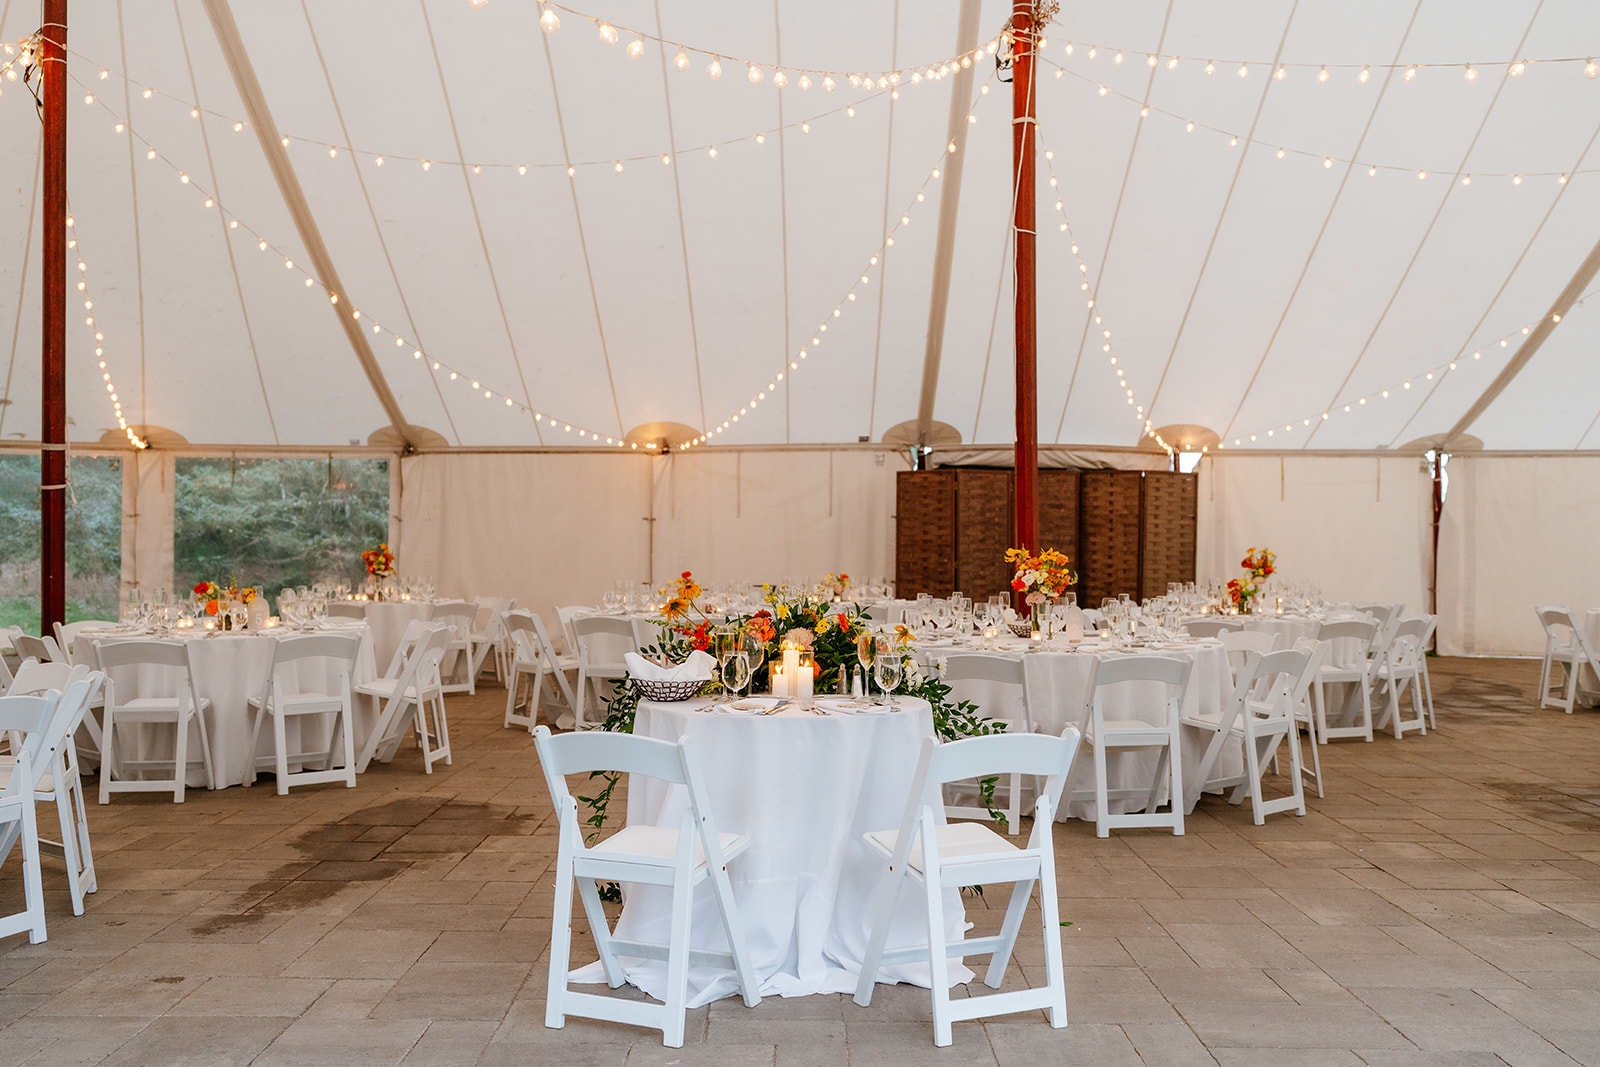 Elegant outdoor tented wedding reception area with string lights and decorated table at the estate at moraine farm